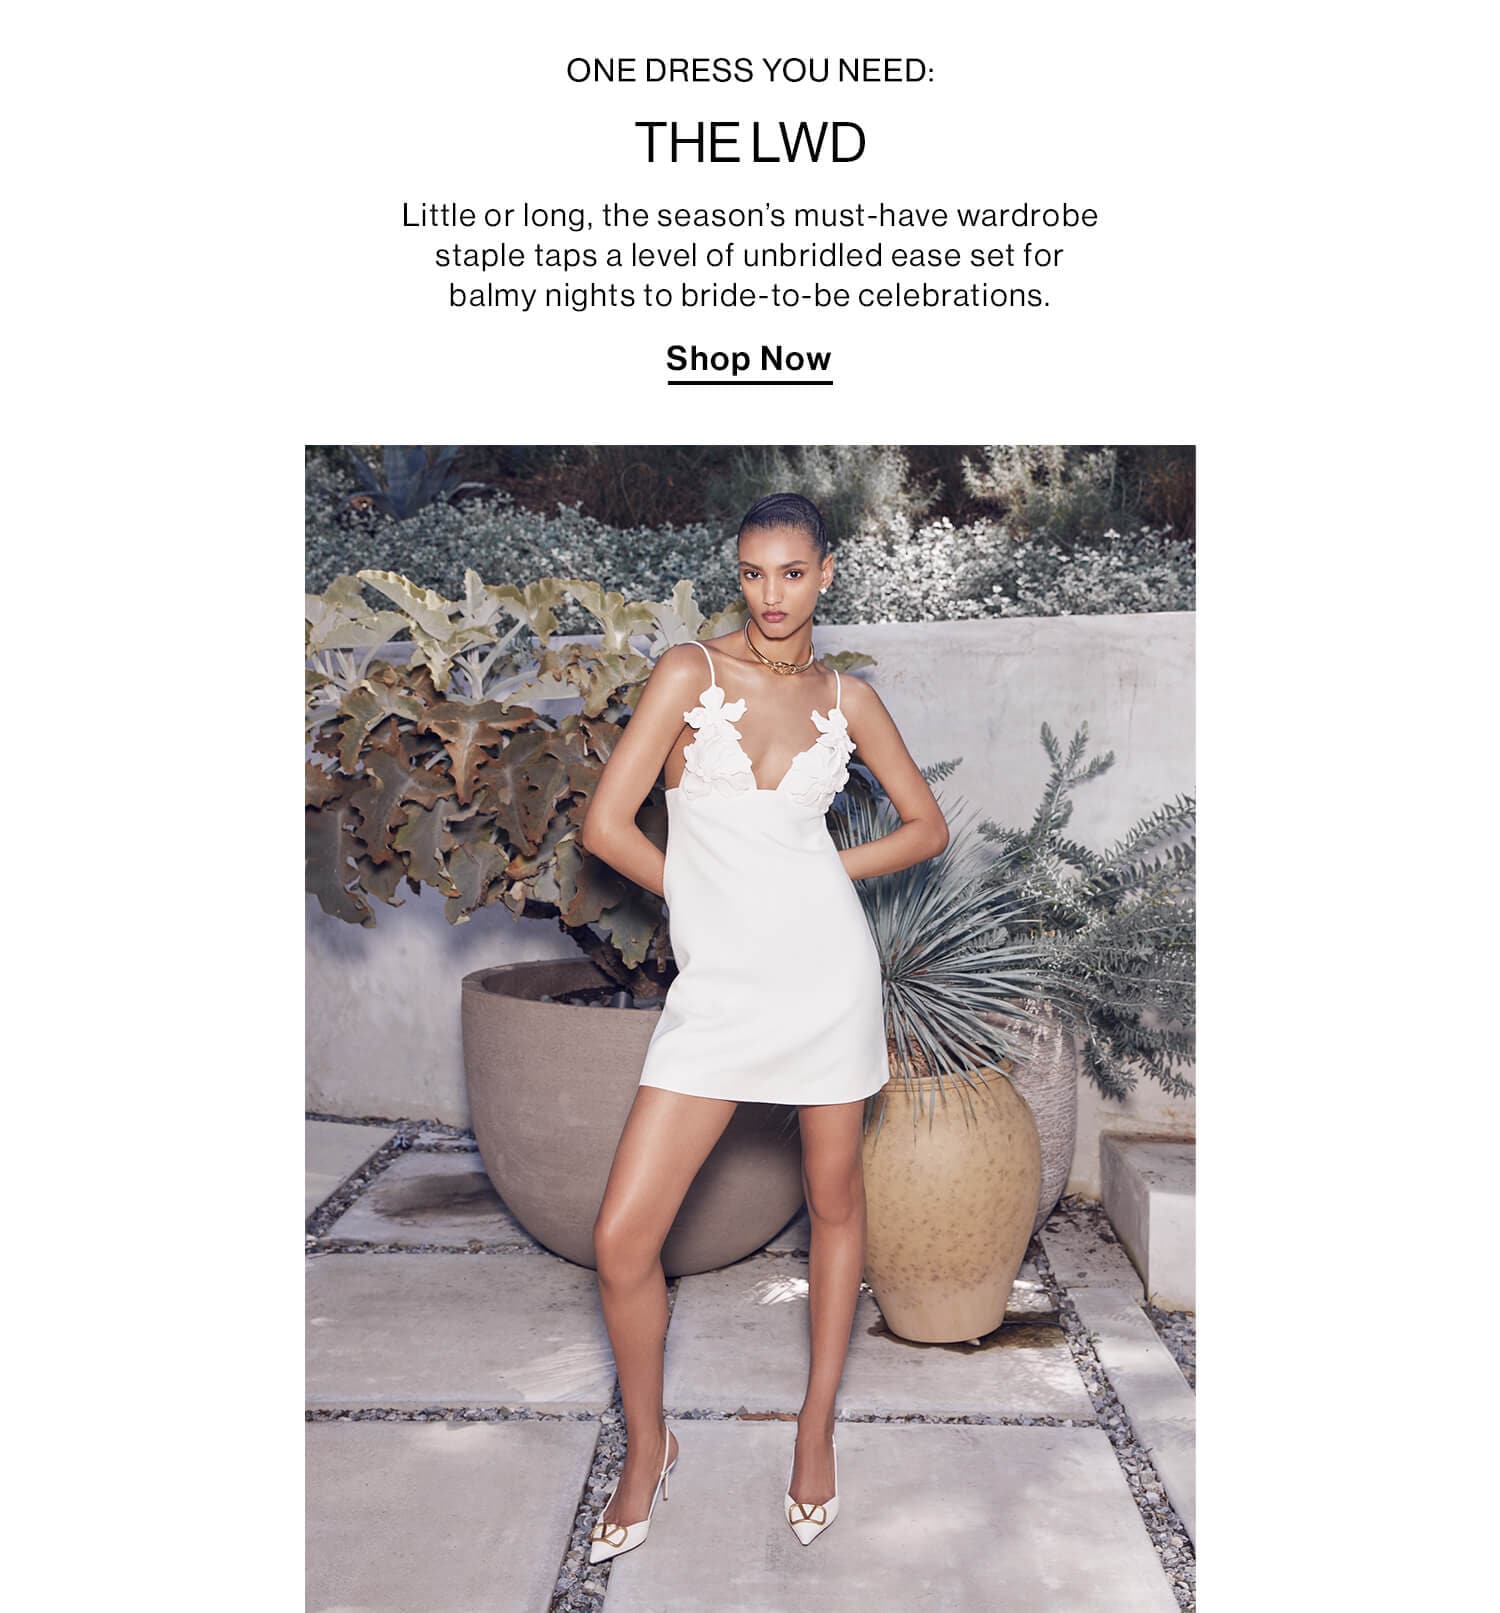 ONE DRESS YOU NEED: THE LWD DEK: Little or long, the season’s must-have wardrobe staple taps a level of unbridled ease set for balmy nights to bride-to-be celebrations. CTA: Shop Now